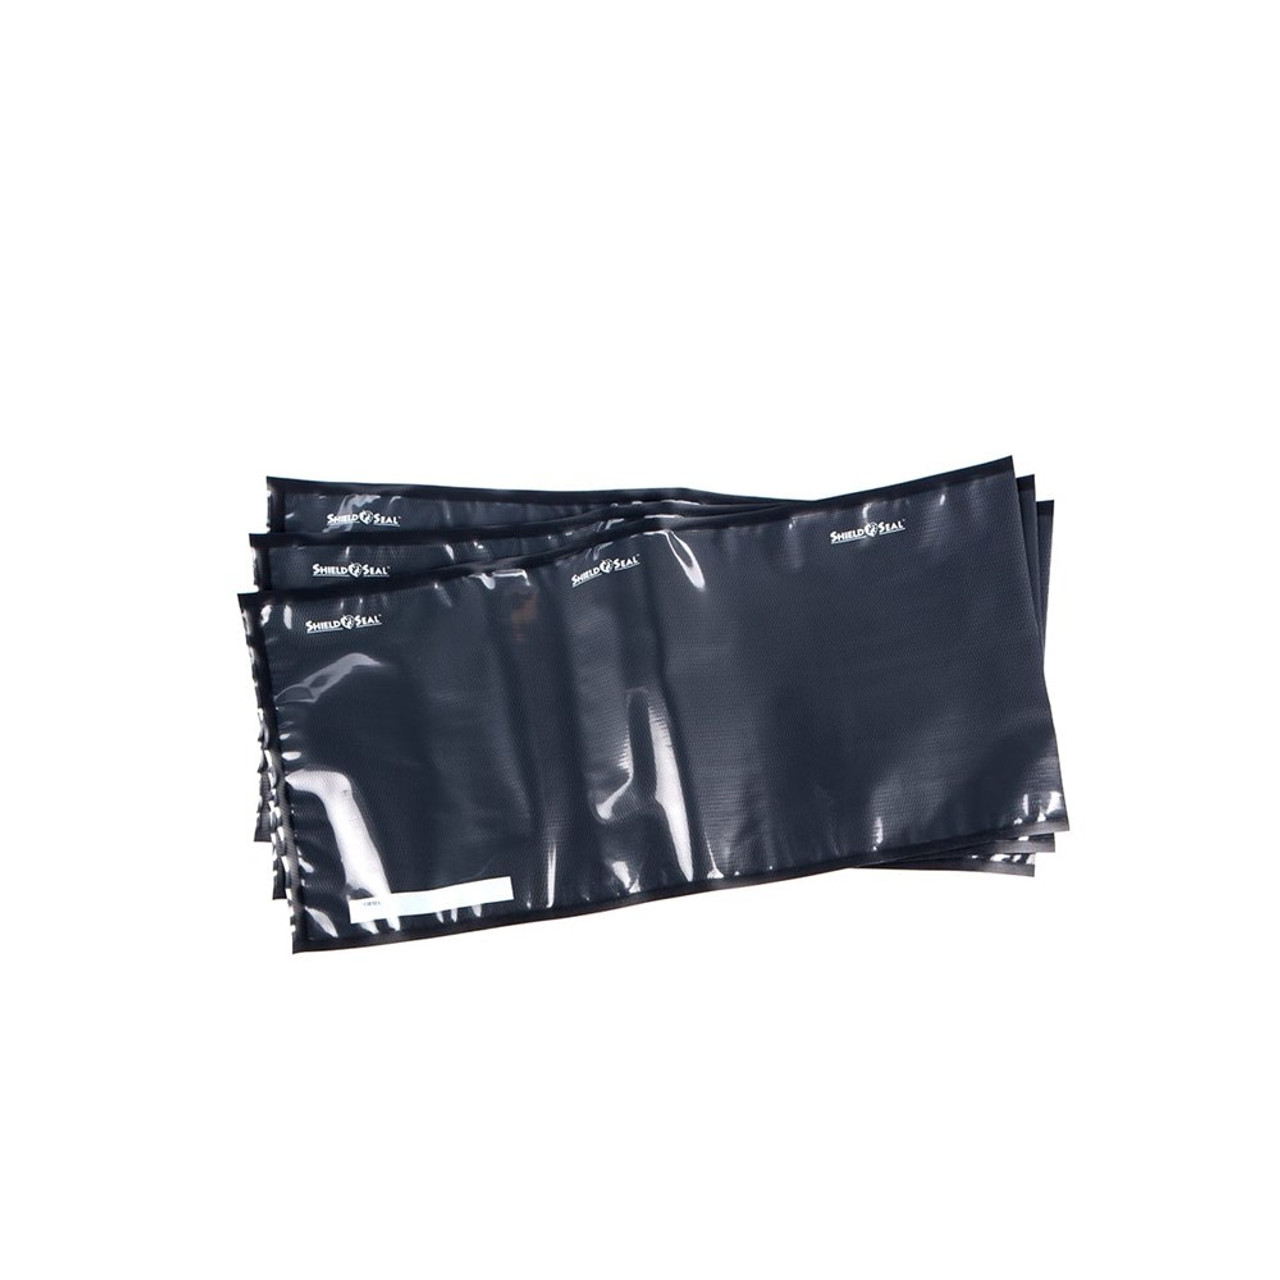 Shield N Seal 11" x 24" Clear and Black Bags 50ct